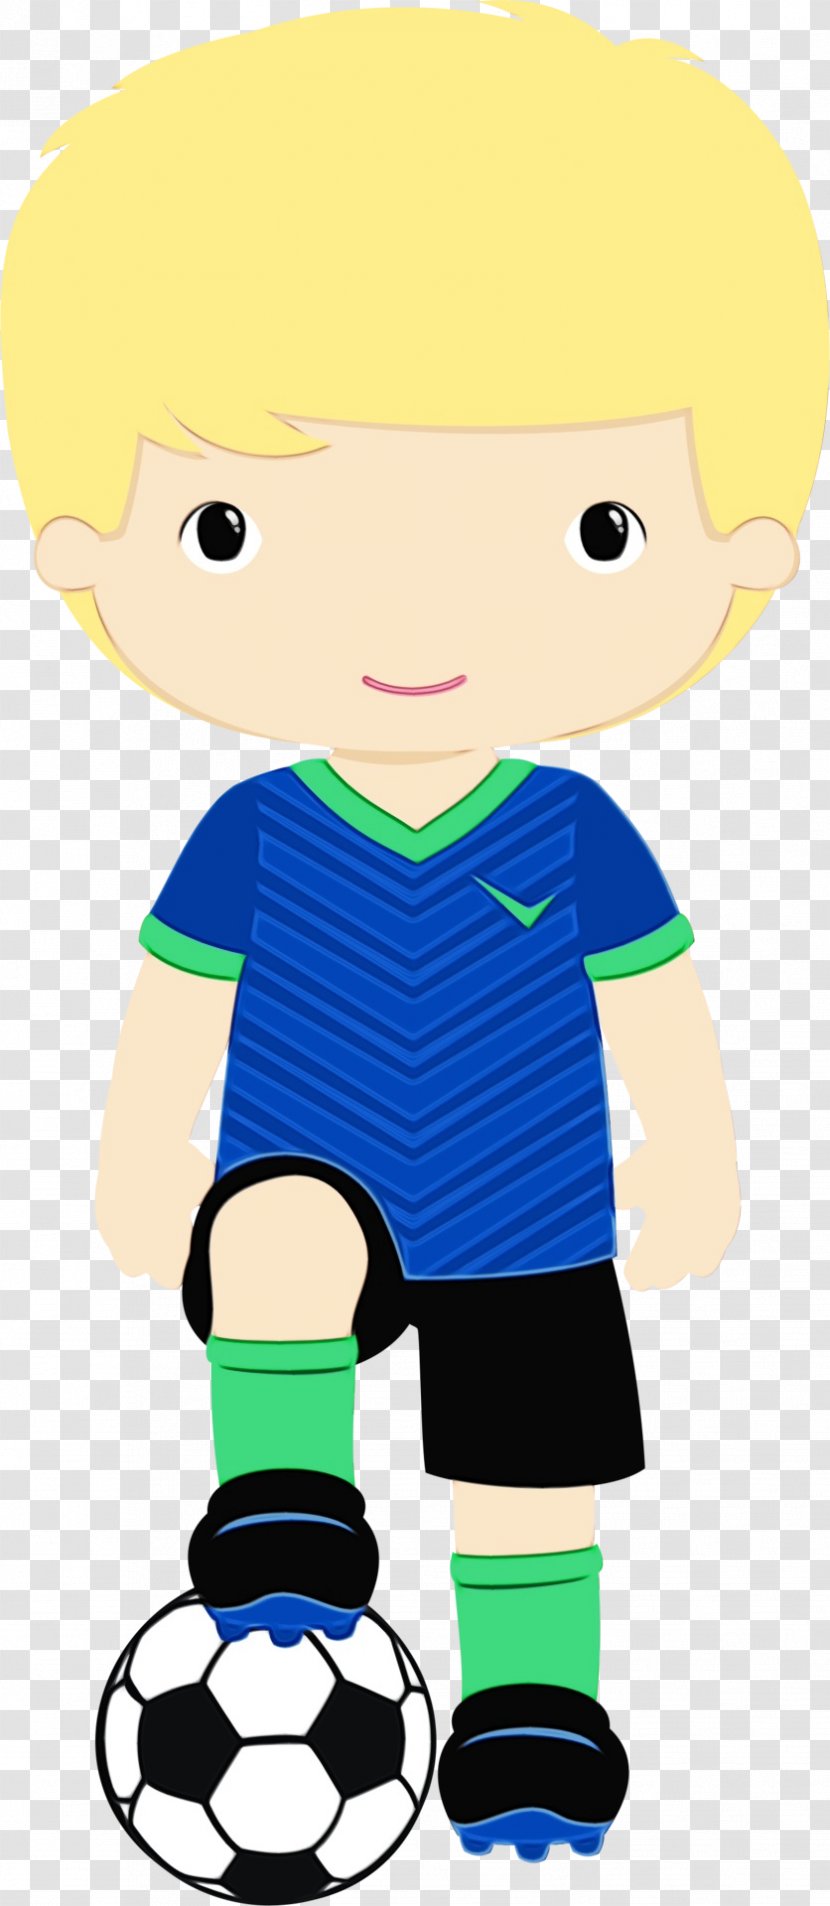 Football Background - Behavior - Style Doll Transparent PNG